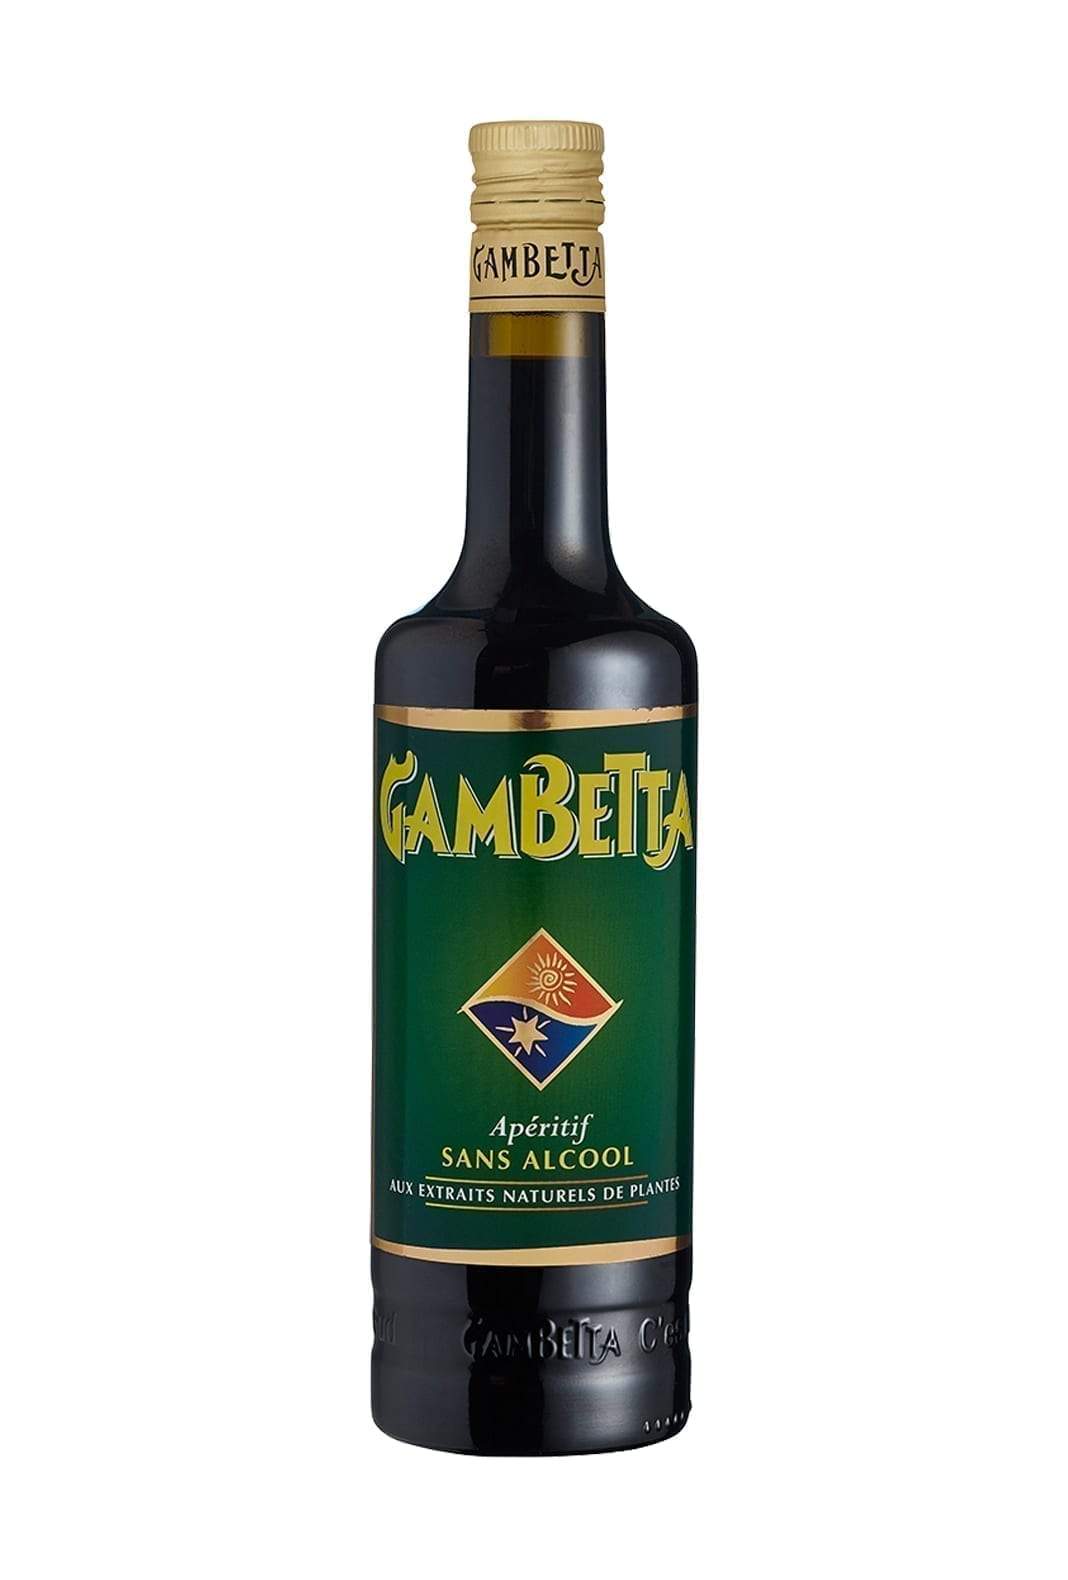 Gambetta Non-Alcoholic Traditional Aperitif 750ml | Bitters | Shop online at Spirits of France